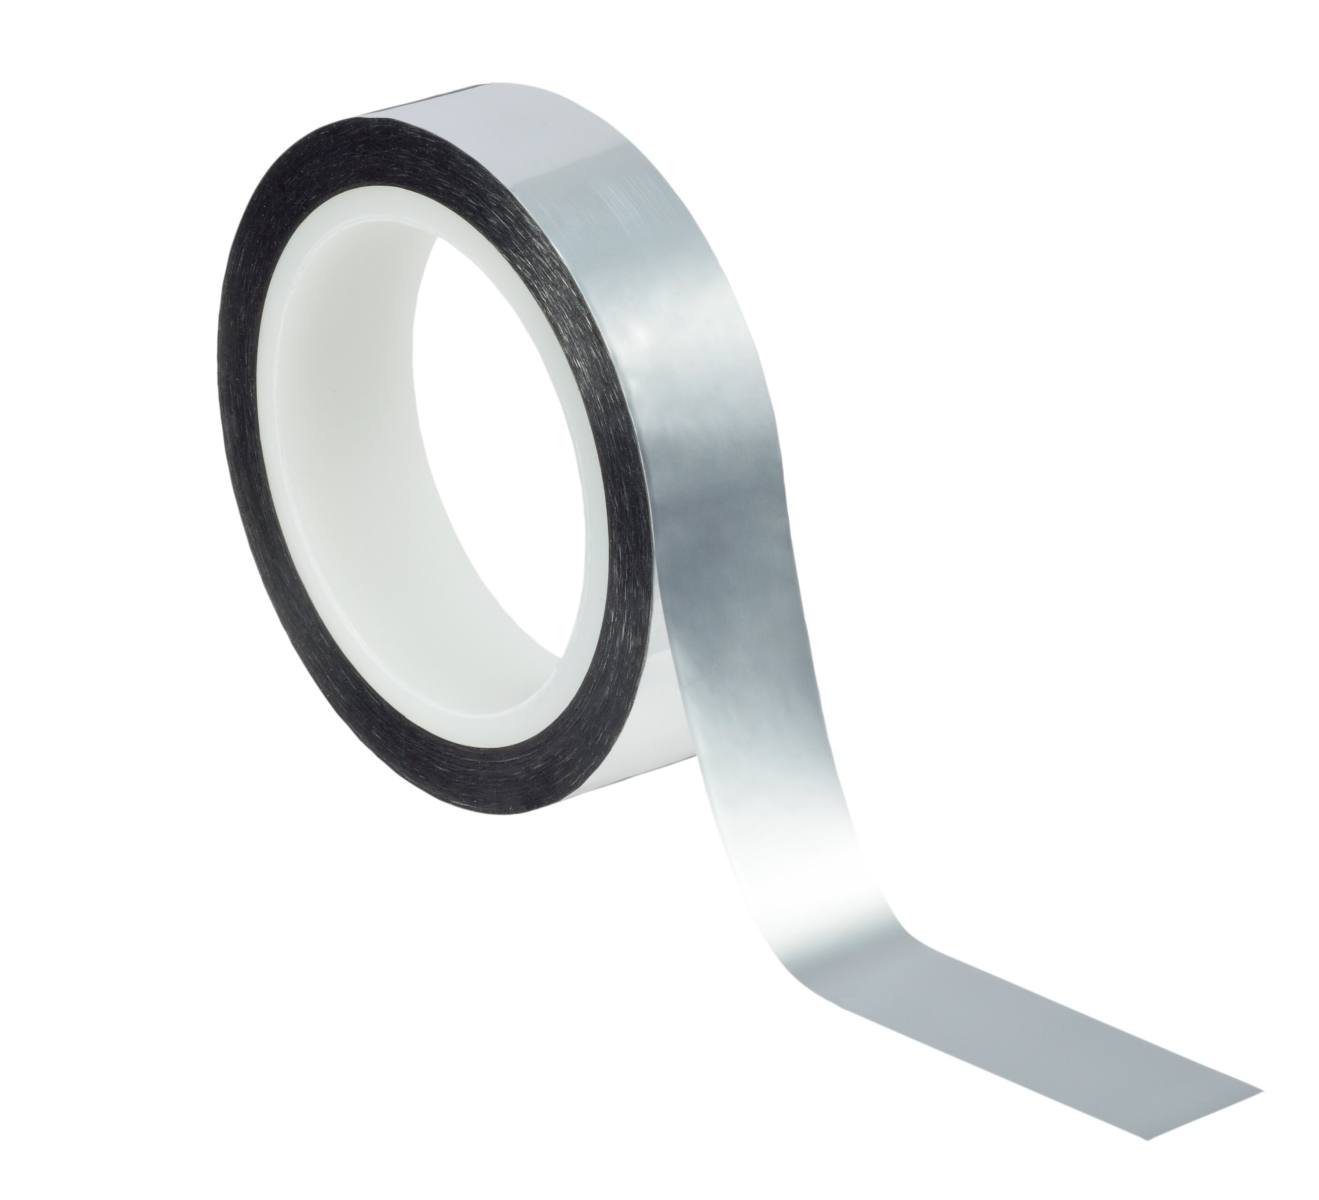 3M polyester adhesive tape 850 S, silver, 9 mm x 66 m, 0.05 mm